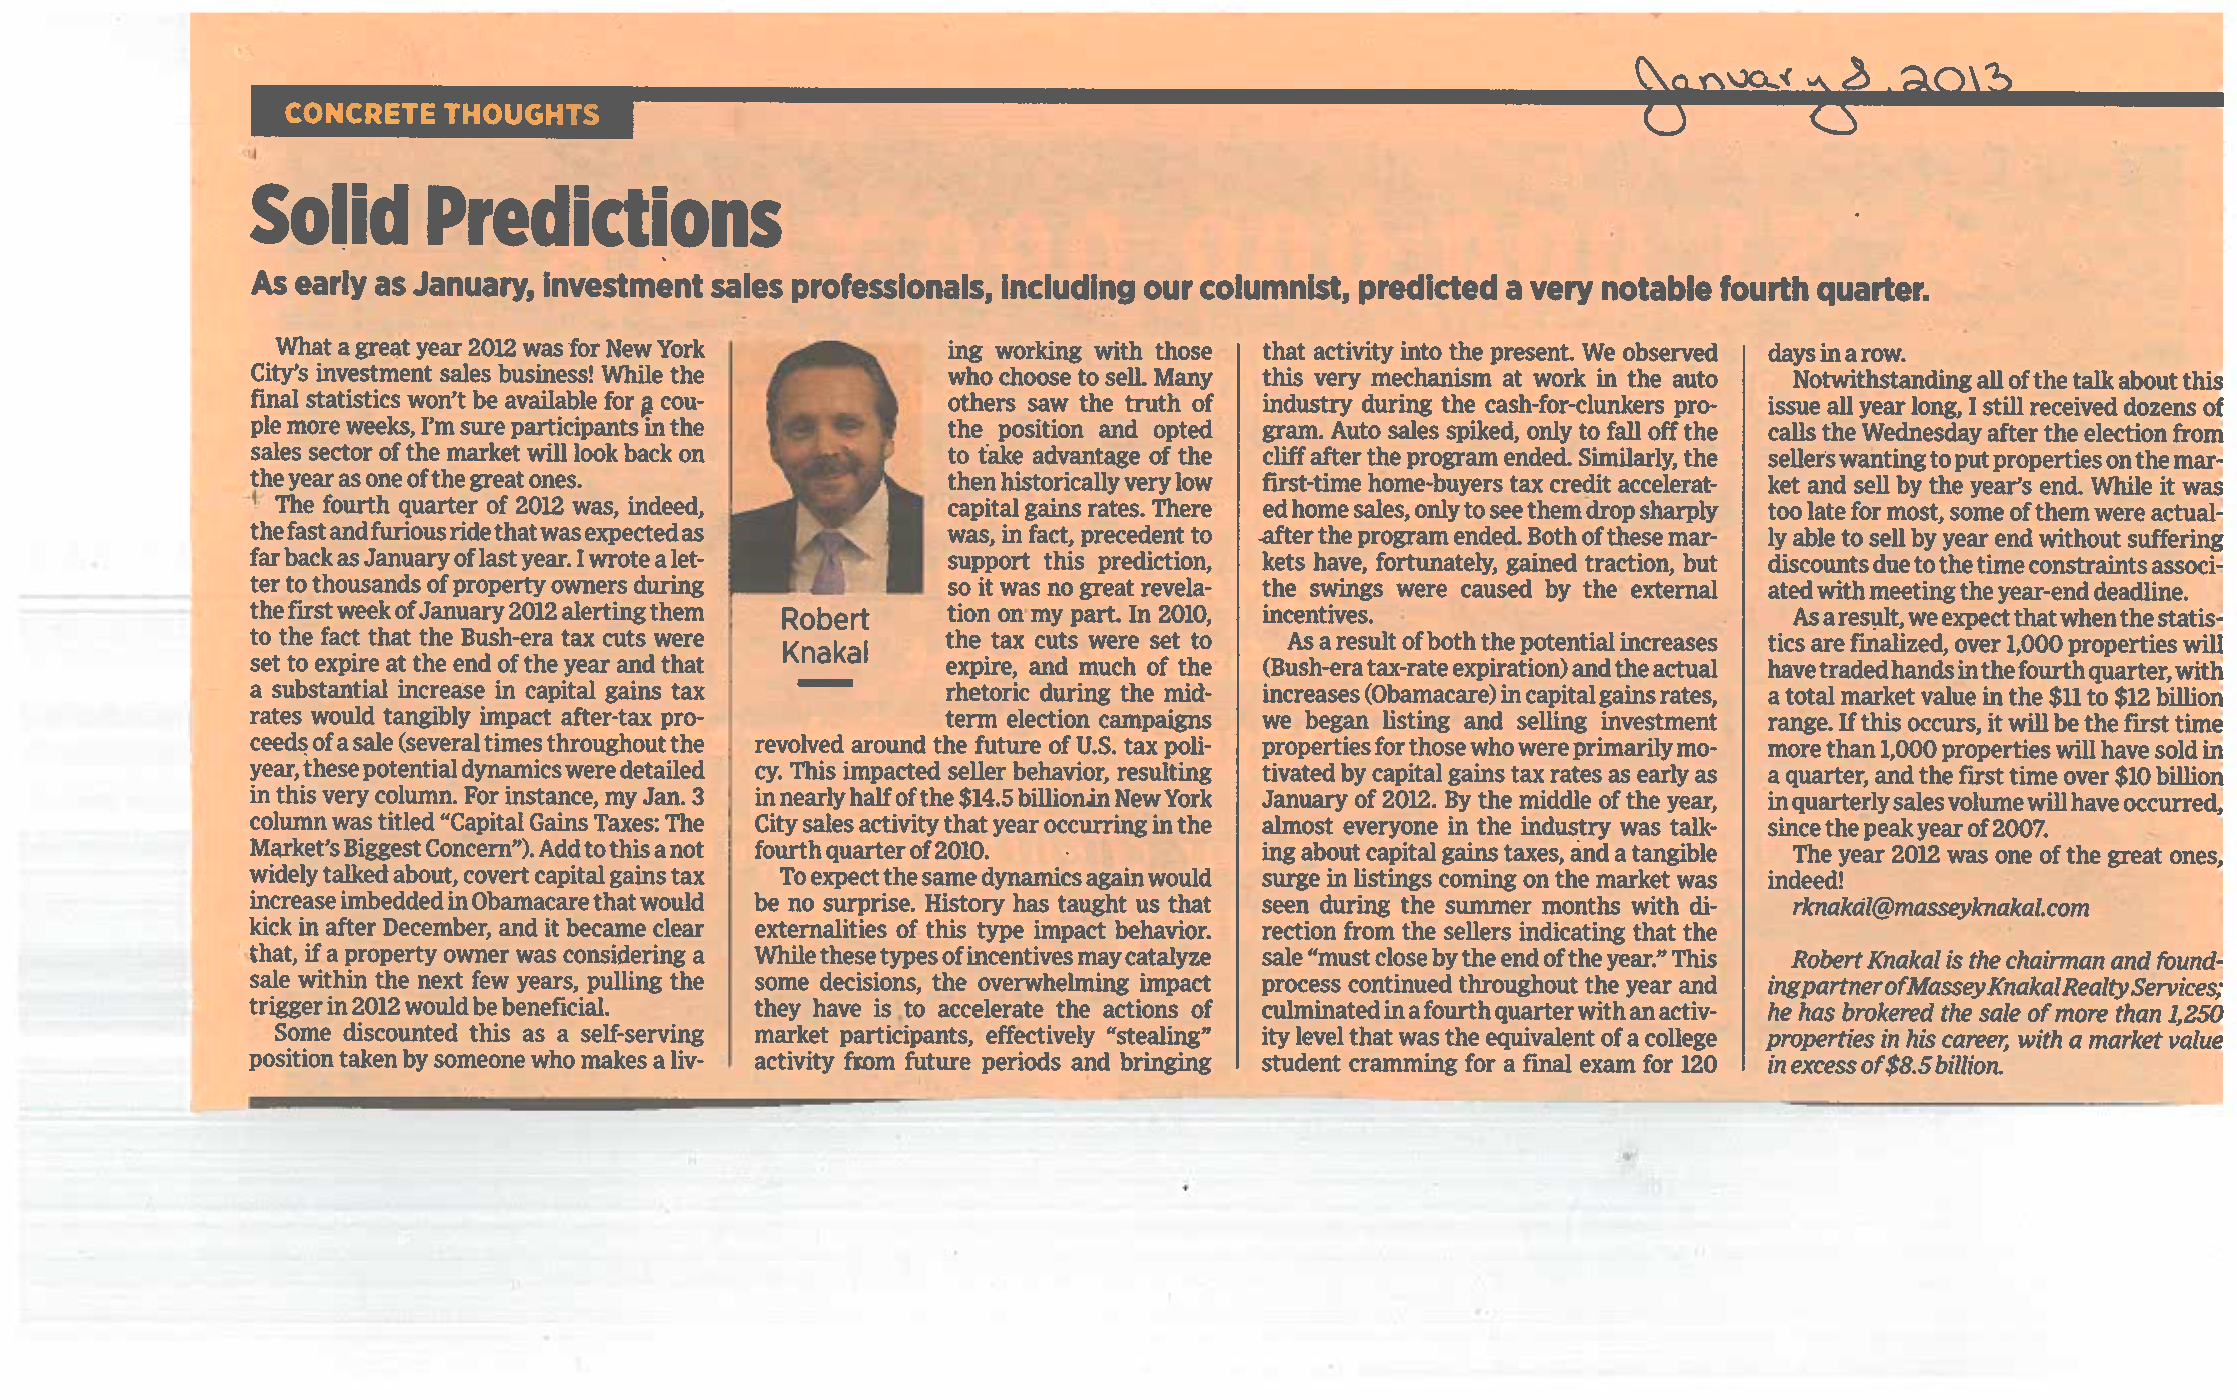 Concrete Thoughts - Solid Predictions - Jan 8 2013